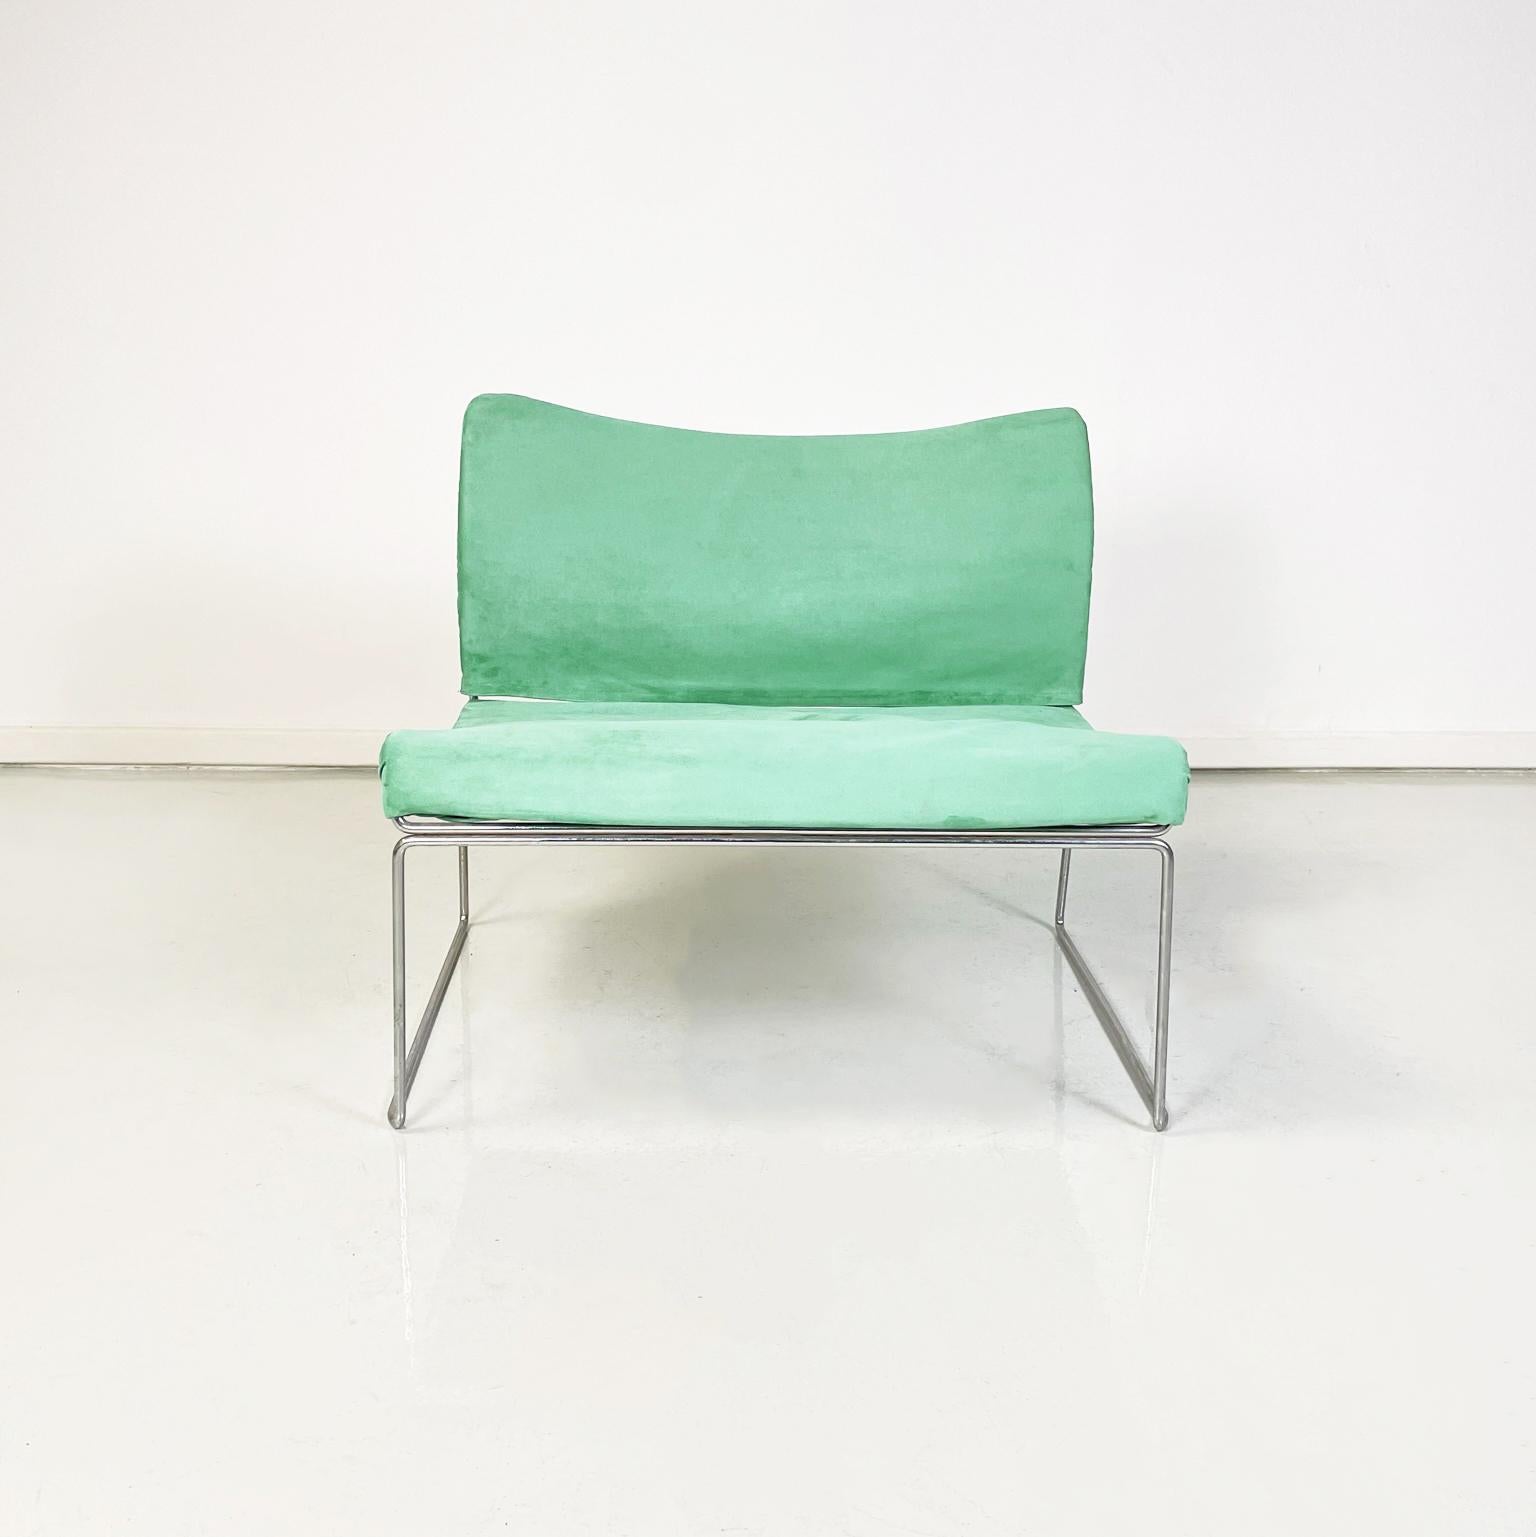 Italian modern aqua green velvet. armchair mod. Saghi by Kazuhide Takahama for Gavina, 1970s
Iconic and elegant armchair mod. Saghi with steel rod structure. The seat and back are lightly padded and upholstered in aqua green velvet..
Produced by